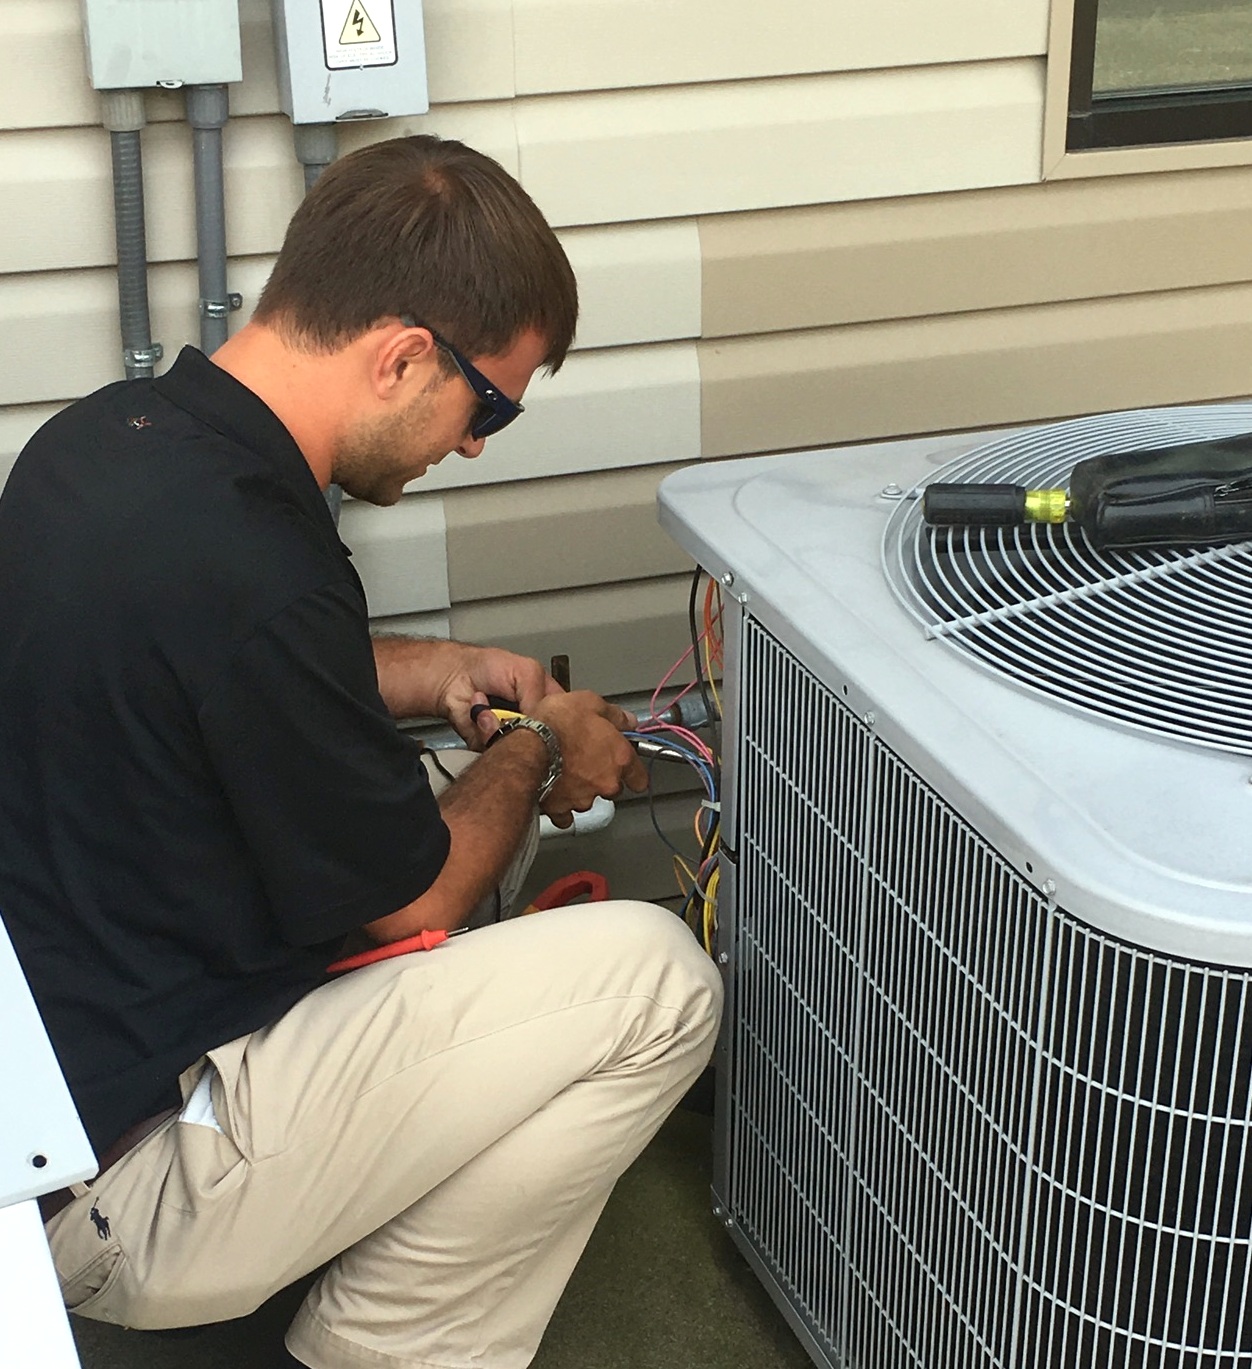 Get More Life Out of Your Home Air Conditioning - Tommy Garner Air ...